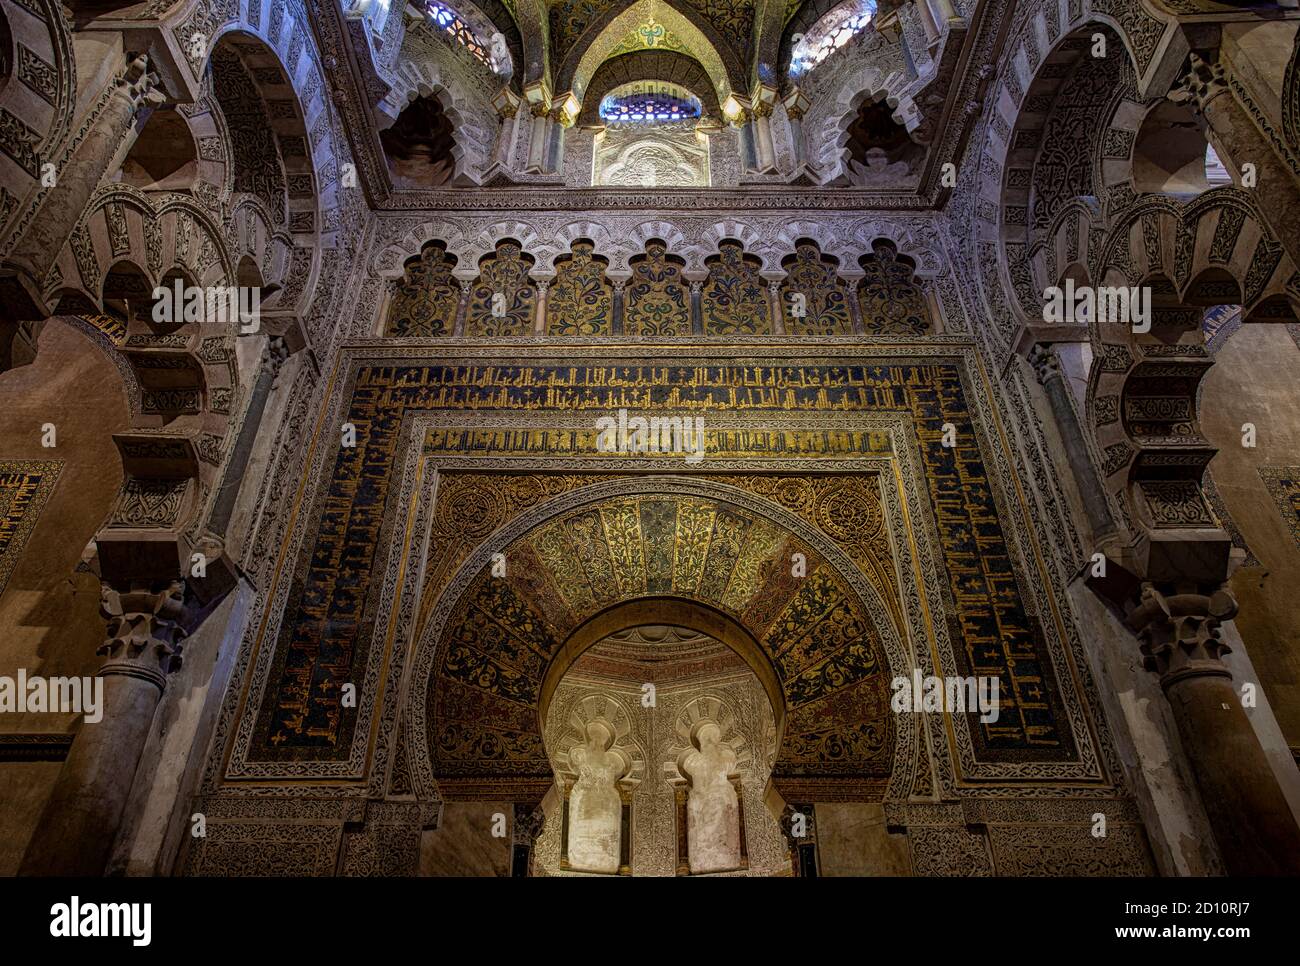 Cordoba mosque. Ceiling and mocarabes.Andalusia, Spain Stock Photo